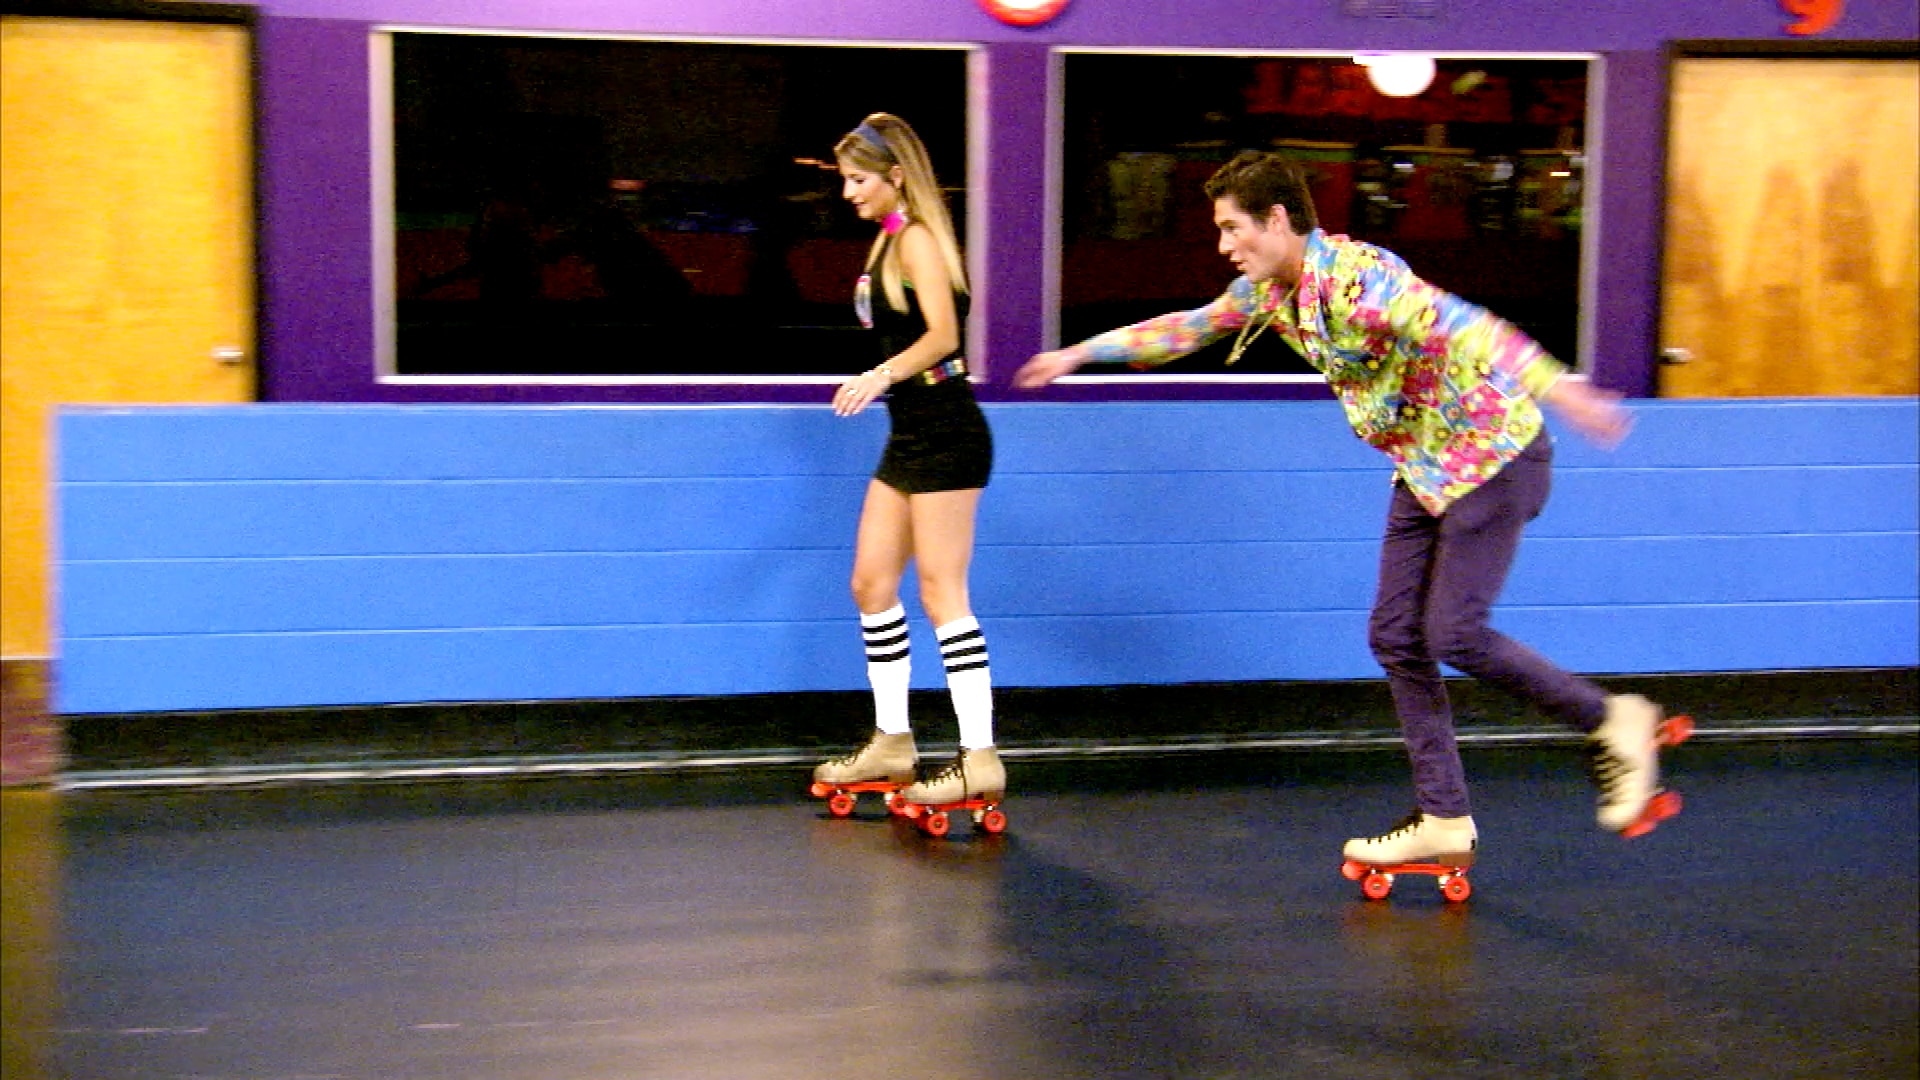 Watch The Charmers Go Skating | Southern Charm Videos1920 x 1080